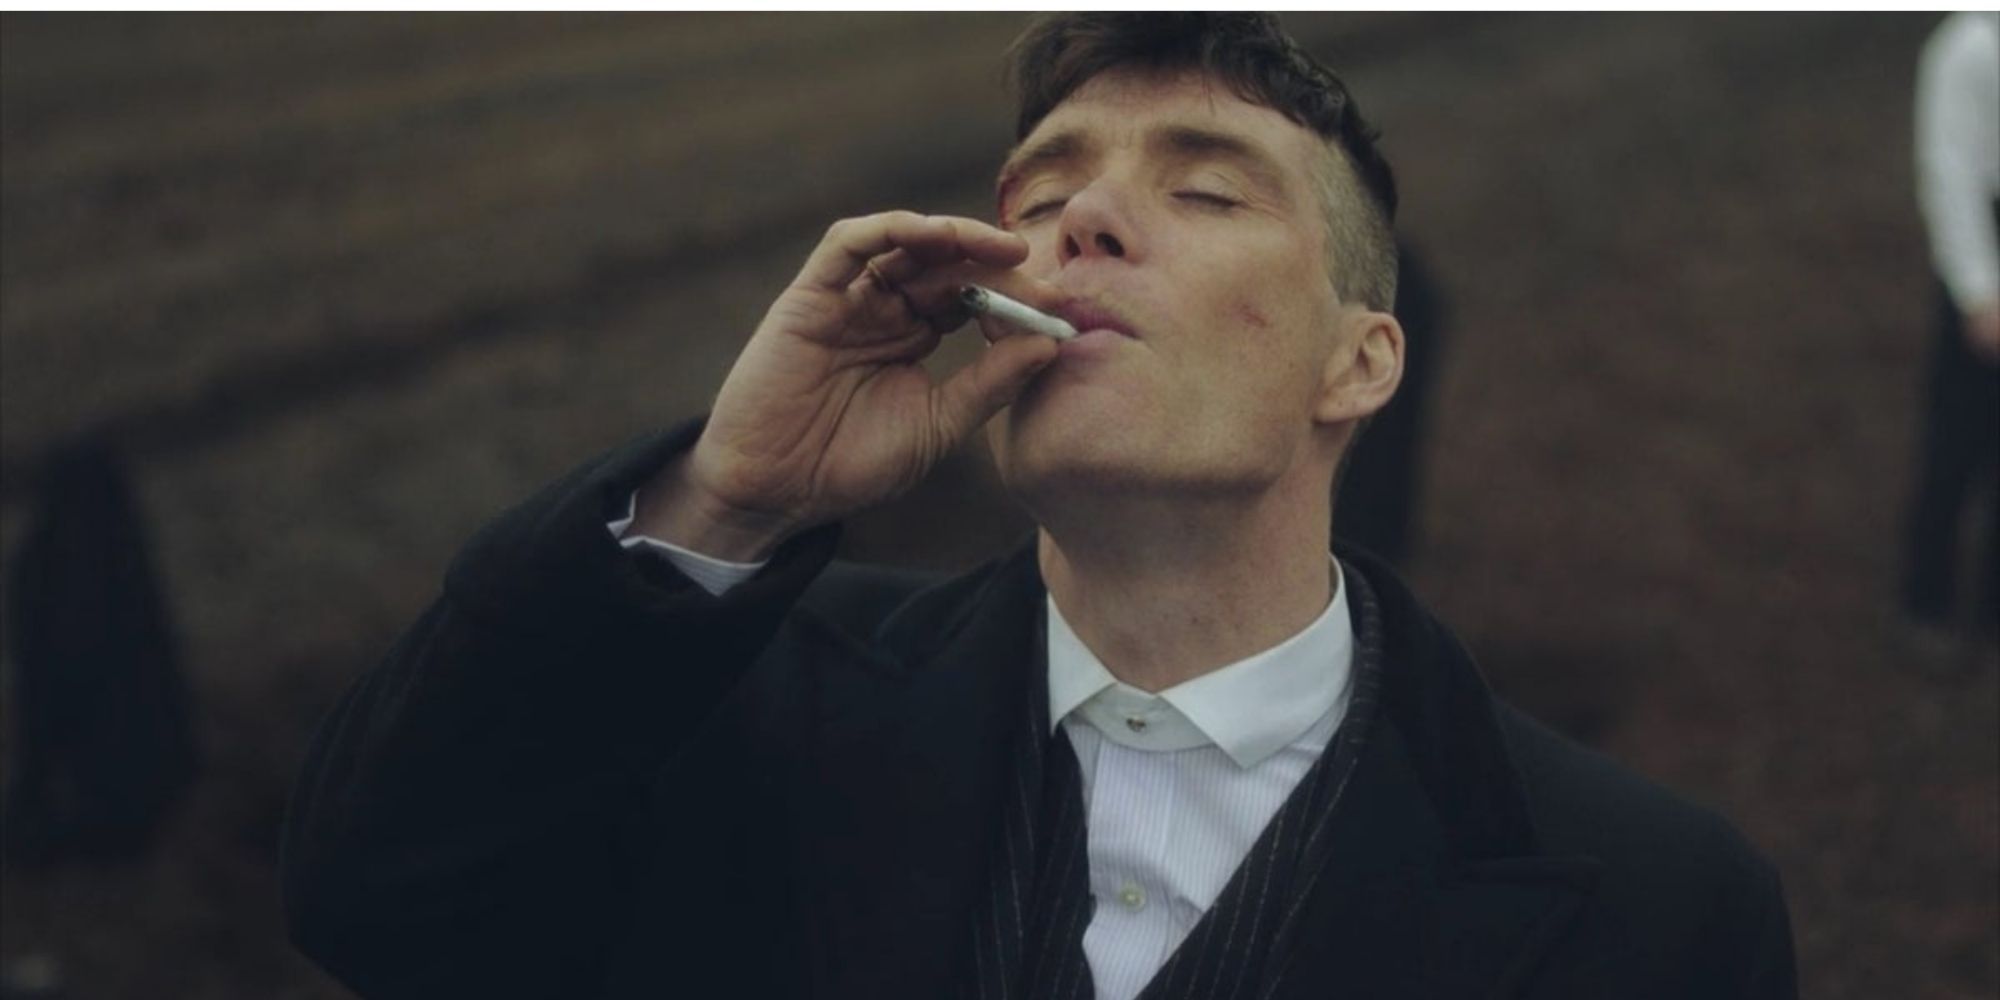 An image of Tommy Shelby from TV show Peaky Blinders.